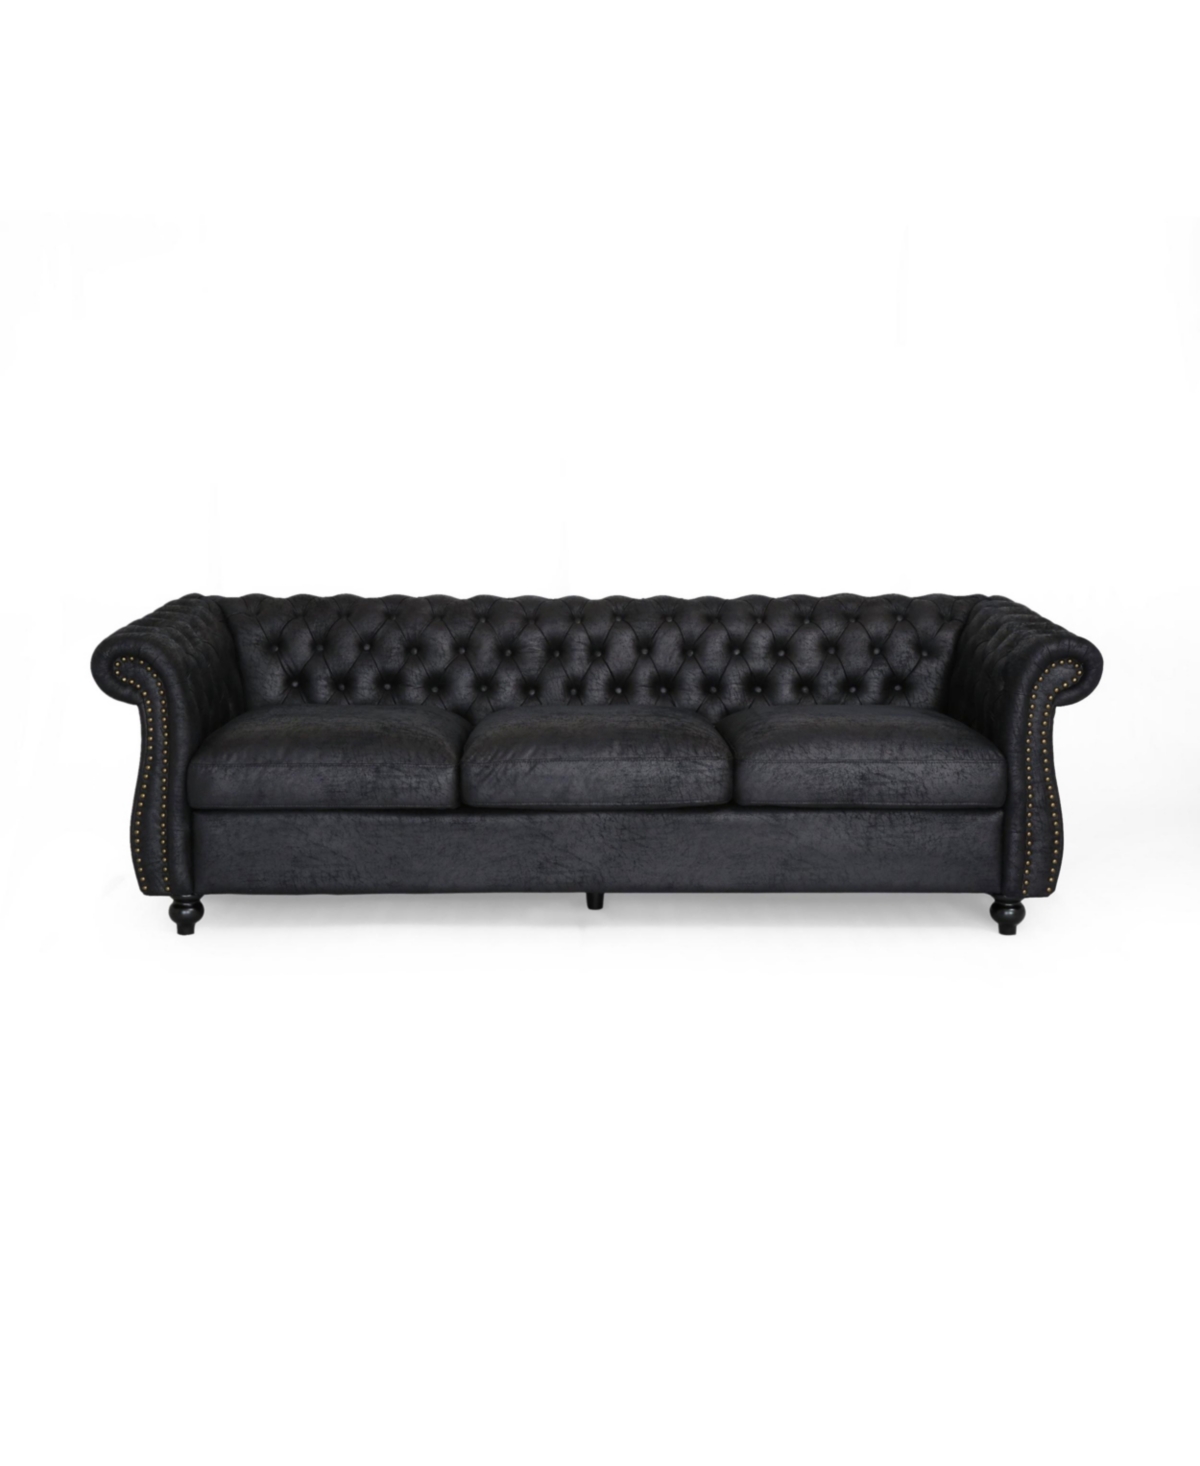 Noble House Somerville Chesterfield Tufted Sofa With Scroll Arms In Black